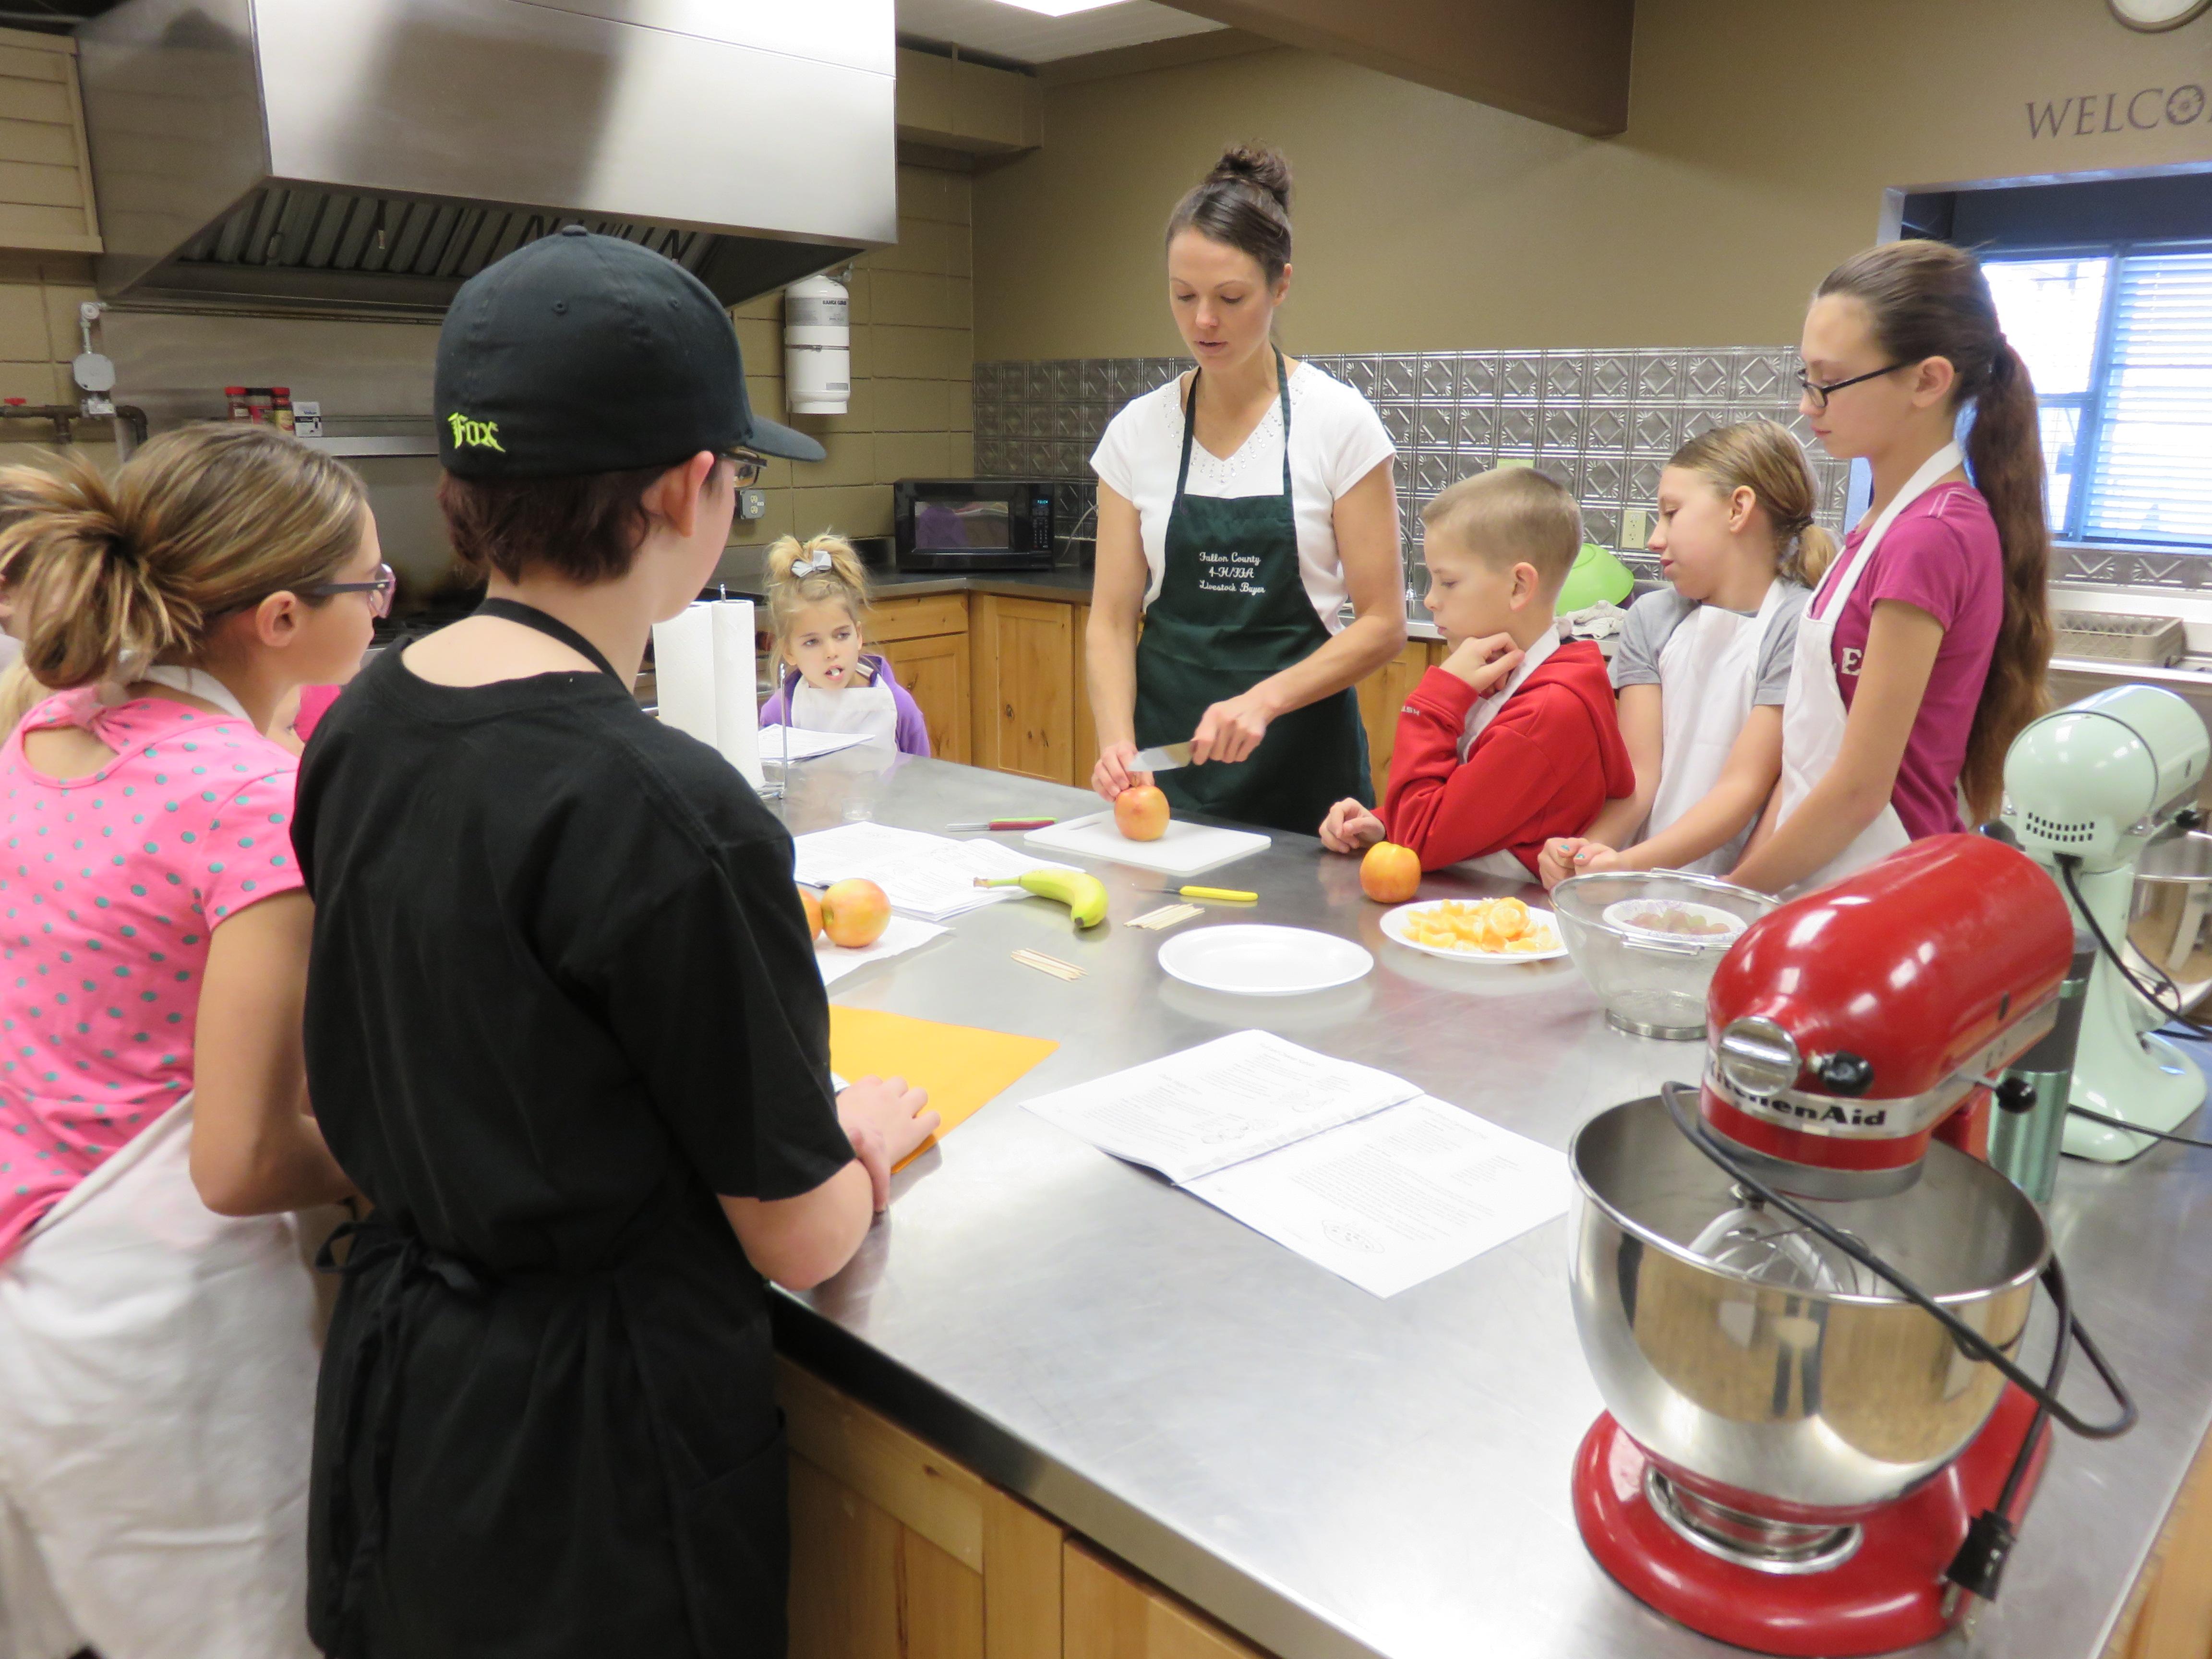 A female volunteer leads youth in a cooking project.